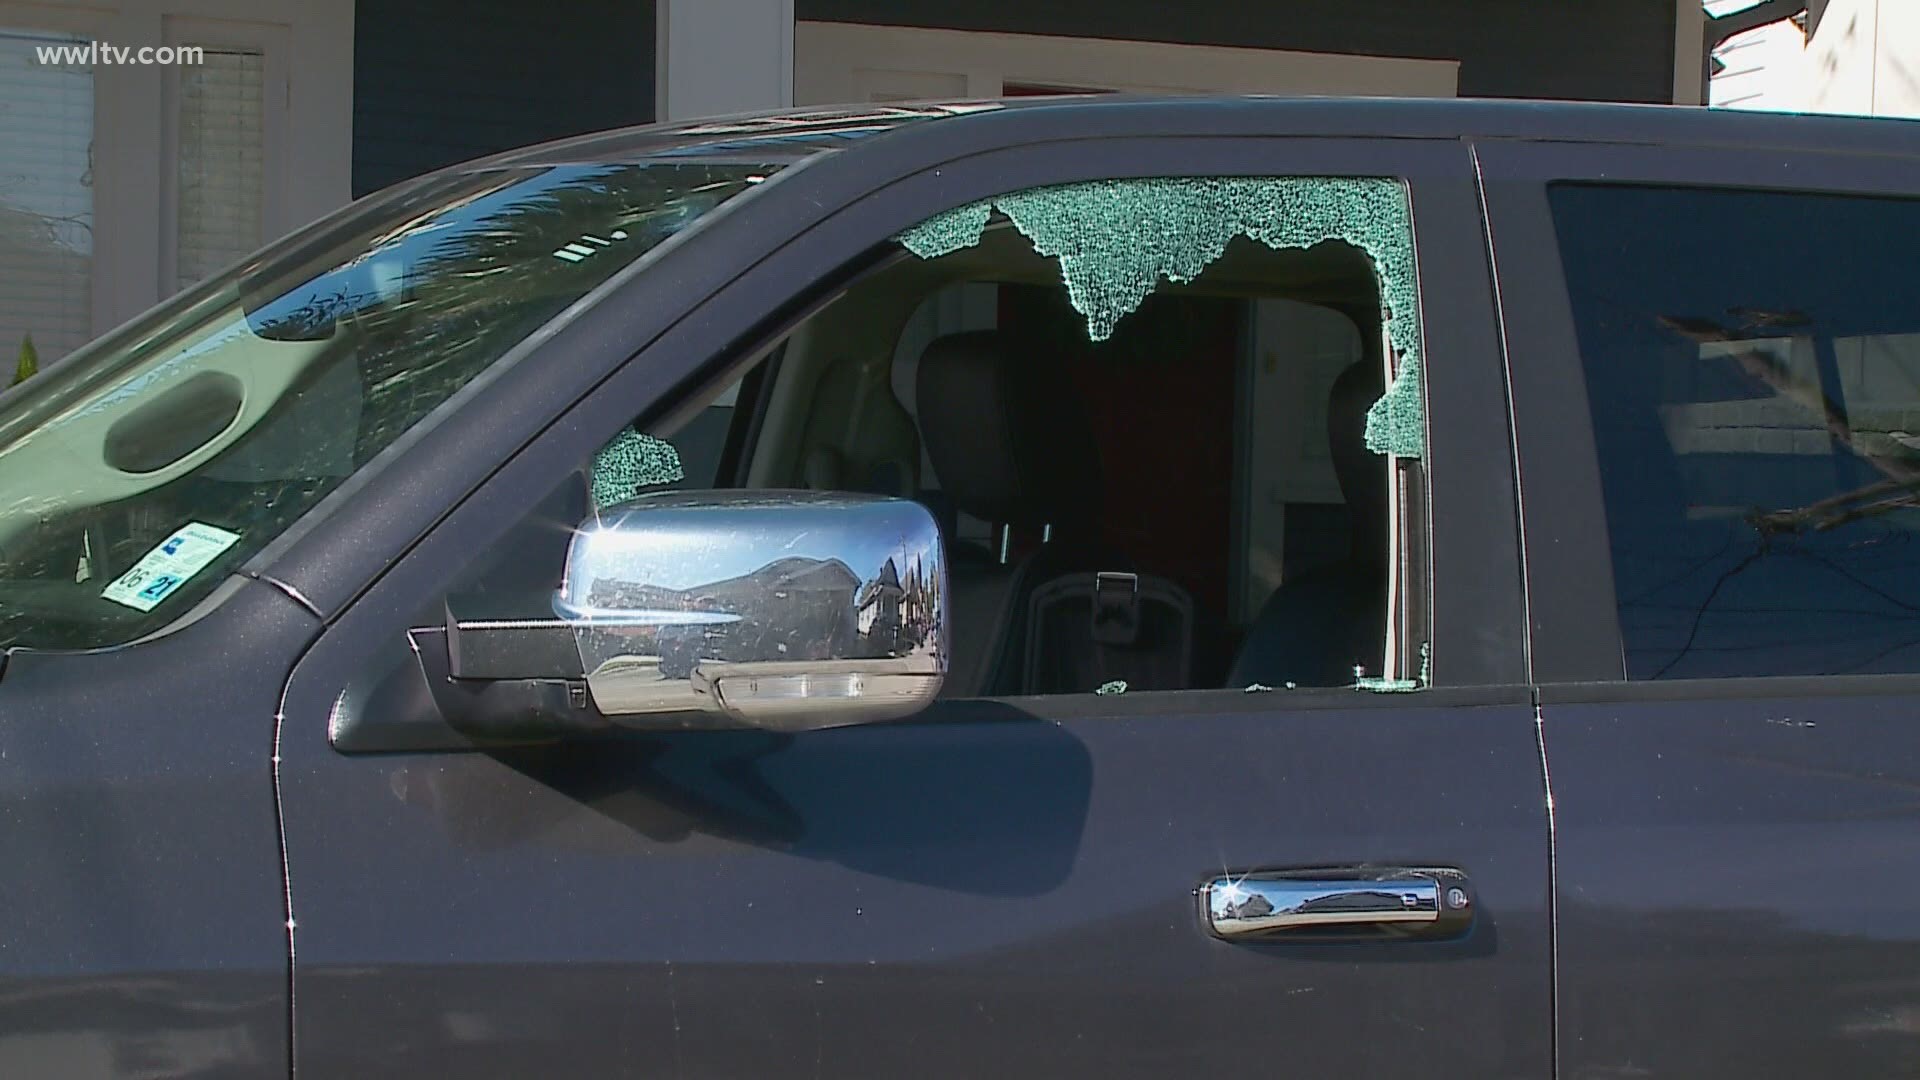 Two city councilmembers are frustrated and want to put a stop to the car break-ins after family along with many other became a victim of the crime.